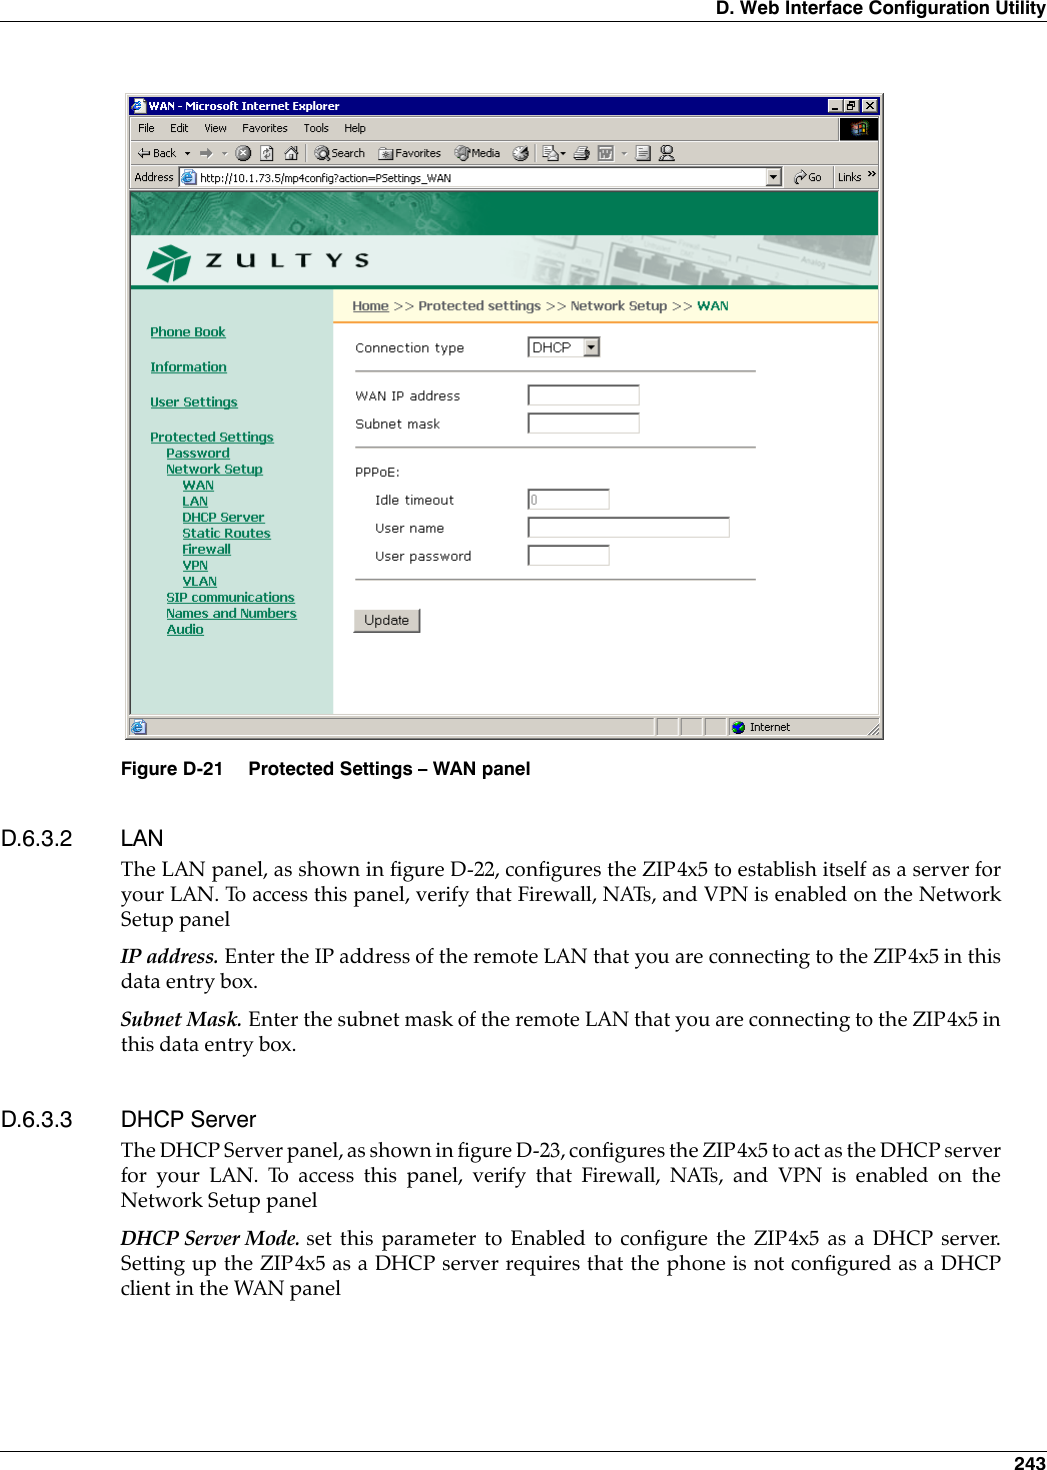 D. Web Interface Configuration Utility 243D.6.3.2 LANThe LAN panel, as shown in figure D-22, configures the ZIP4x5 to establish itself as a server foryour LAN. To access this panel, verify that Firewall, NATs, and VPN is enabled on the NetworkSetup panelIP address. Enter the IP address of the remote LAN that you are connecting to the ZIP4x5 in thisdata entry box.Subnet Mask. Enter the subnet mask of the remote LAN that you are connecting to the ZIP4x5 inthis data entry box.D.6.3.3 DHCP ServerThe DHCP Server panel, as shown in figure D-23, configures the ZIP4x5 to act as the DHCP serverfor your LAN. To access this panel, verify that Firewall, NATs, and VPN is enabled on theNetwork Setup panelDHCP Server Mode. set this parameter to Enabled to configure the ZIP4x5 as a DHCP server.Setting up the ZIP4x5 as a DHCP server requires that the phone is not configured as a DHCPclient in the WAN panelFigure D-21 Protected Settings – WAN panel